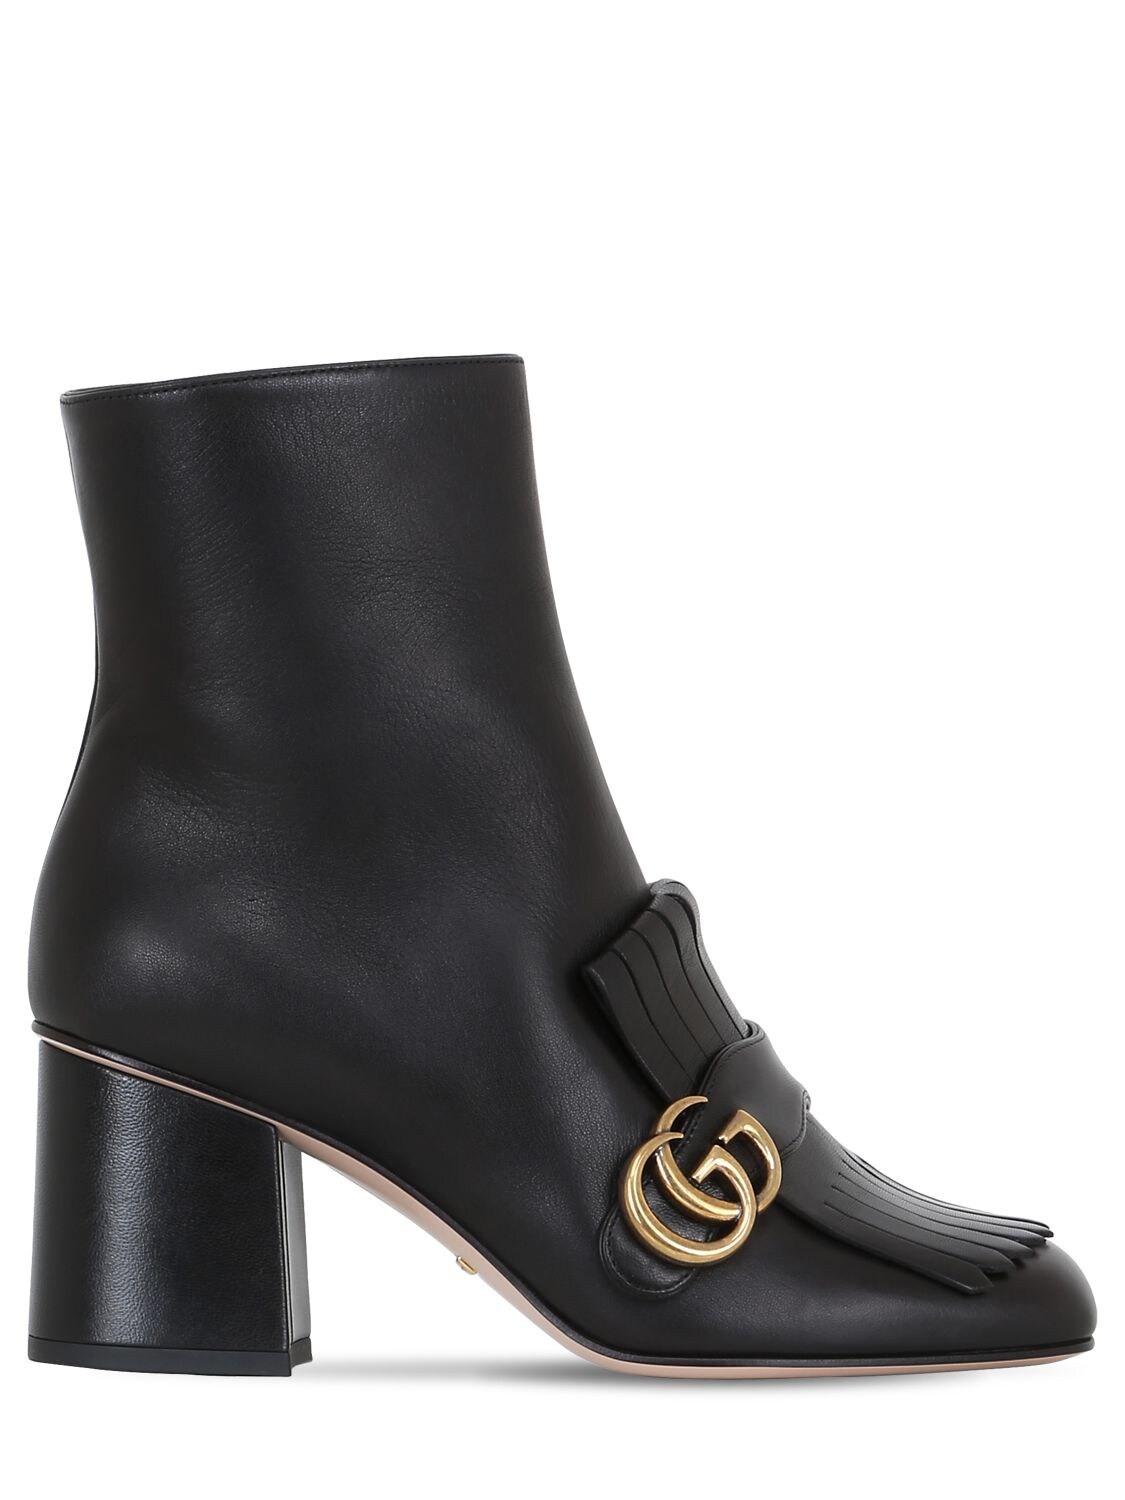 GUCCI 75MM MARMONT FRINGED LEATHER BOOTS,70II9H011-MTAWMA2